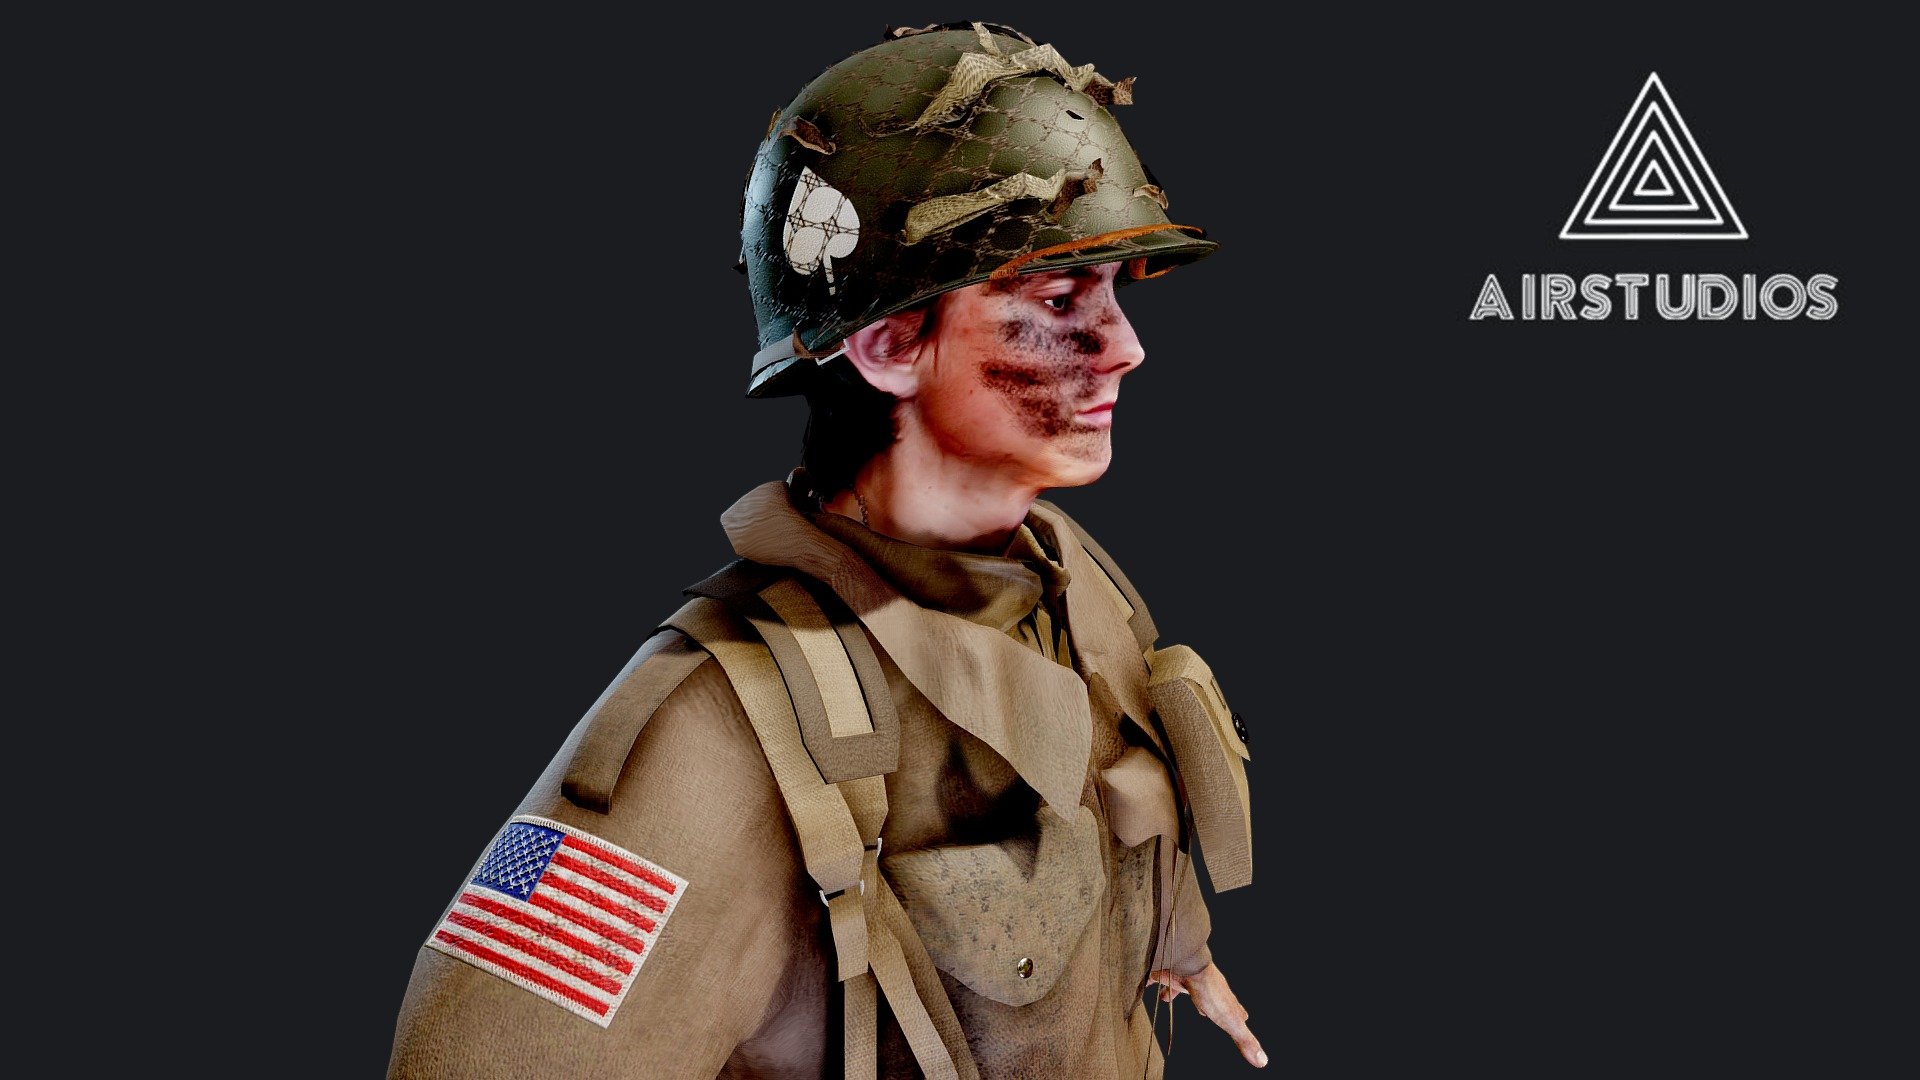 World War 2 US Paratrooper

Textures are imbedded so all you need to do is open the file. No extra work

Made in Maya - World War 2 US Paratrooper - Buy Royalty Free 3D model by AirStudios (@sebbe613) 3d model